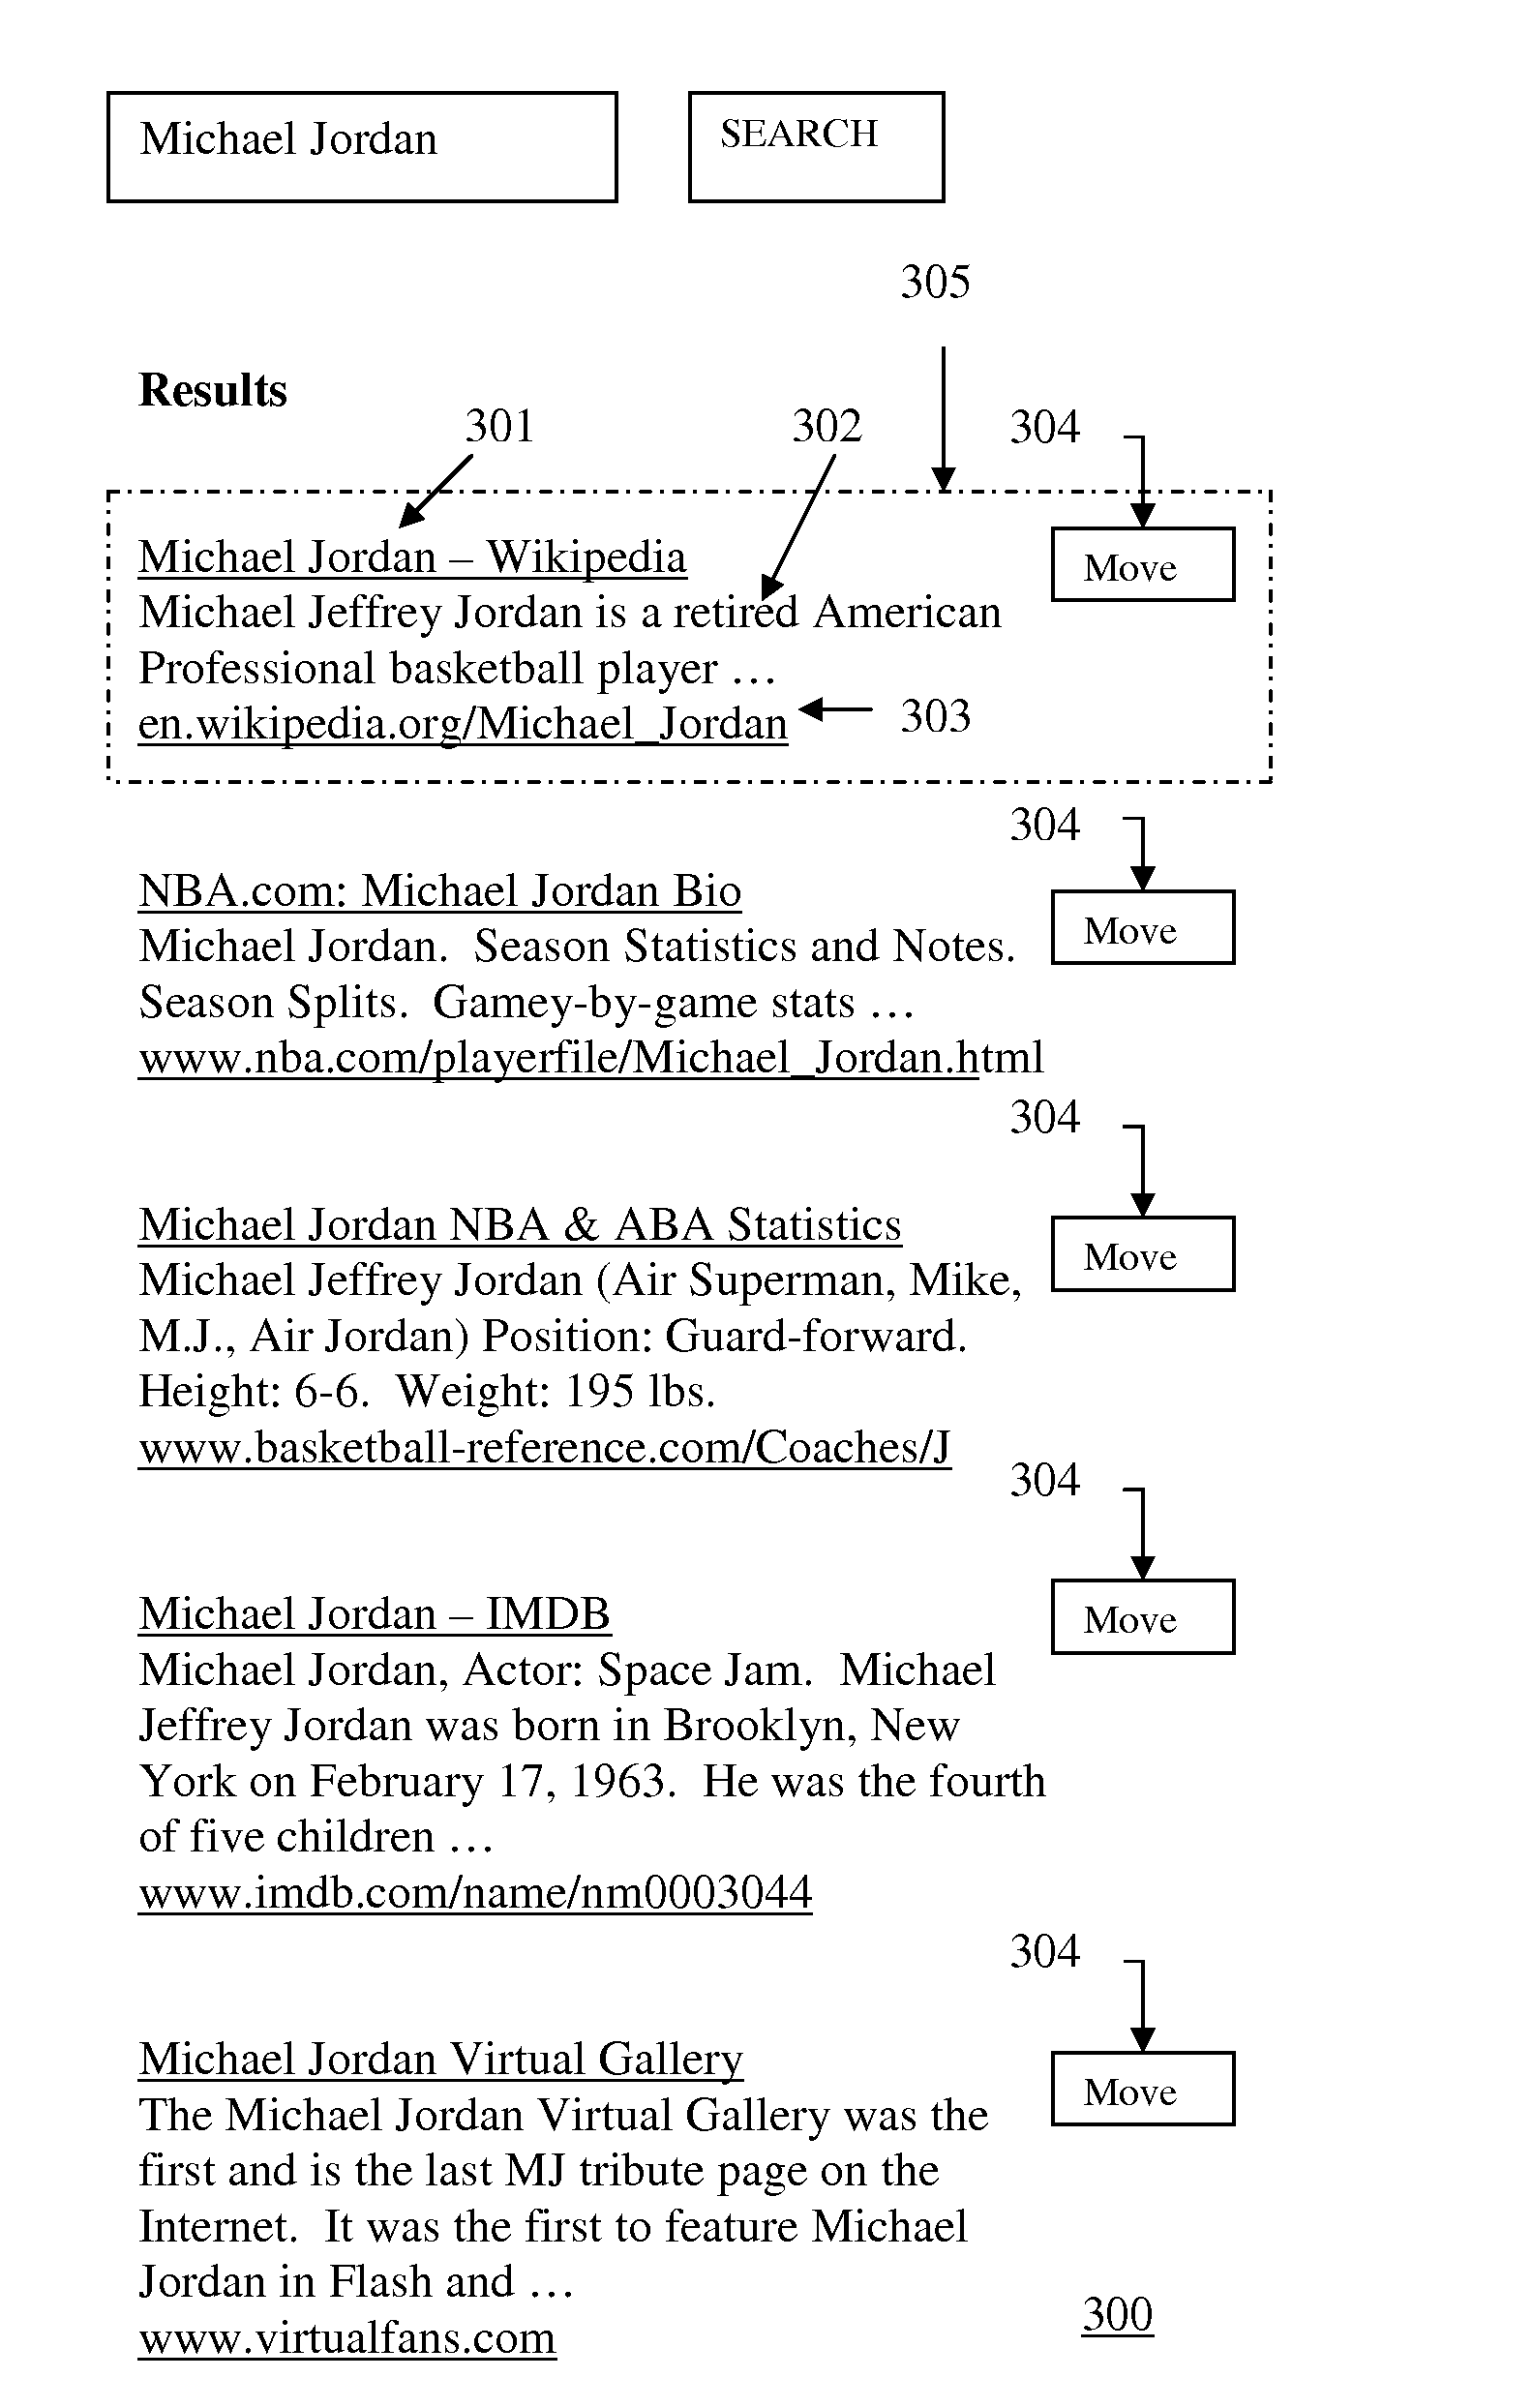 Method for human ranking of search results